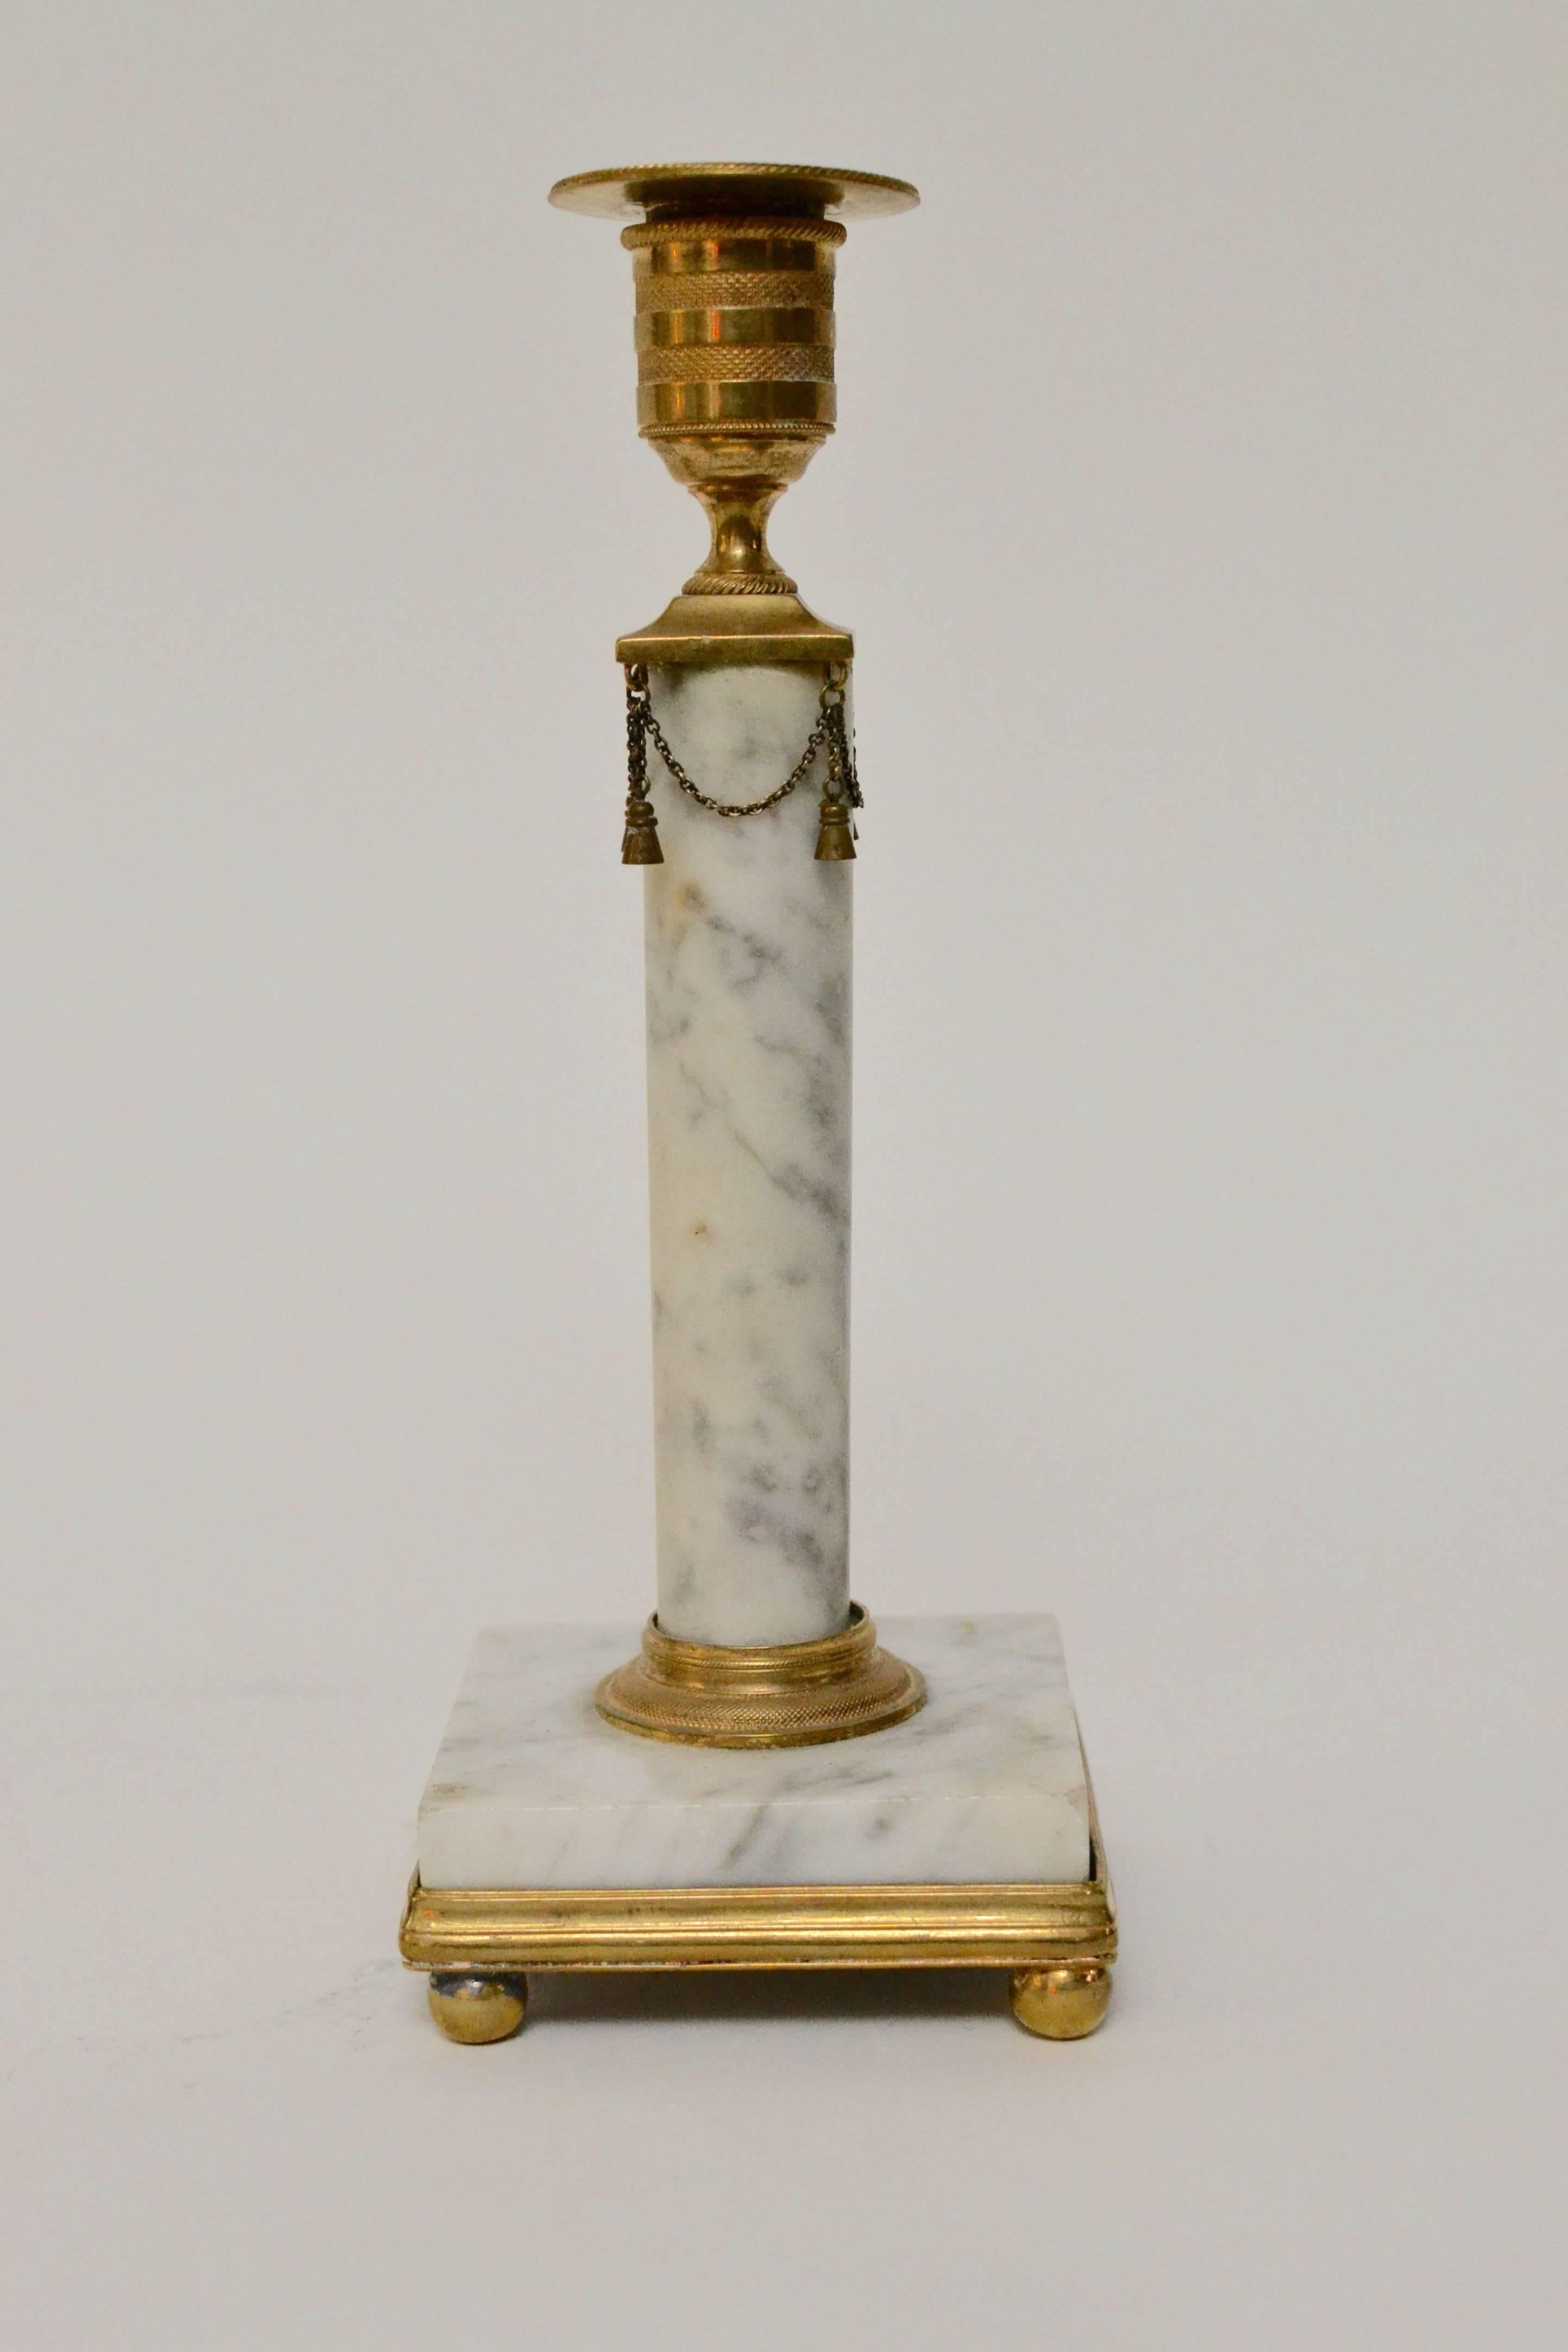 Pair of Gustavian gilt bronze and white marble candlesticks, late 18th century. 